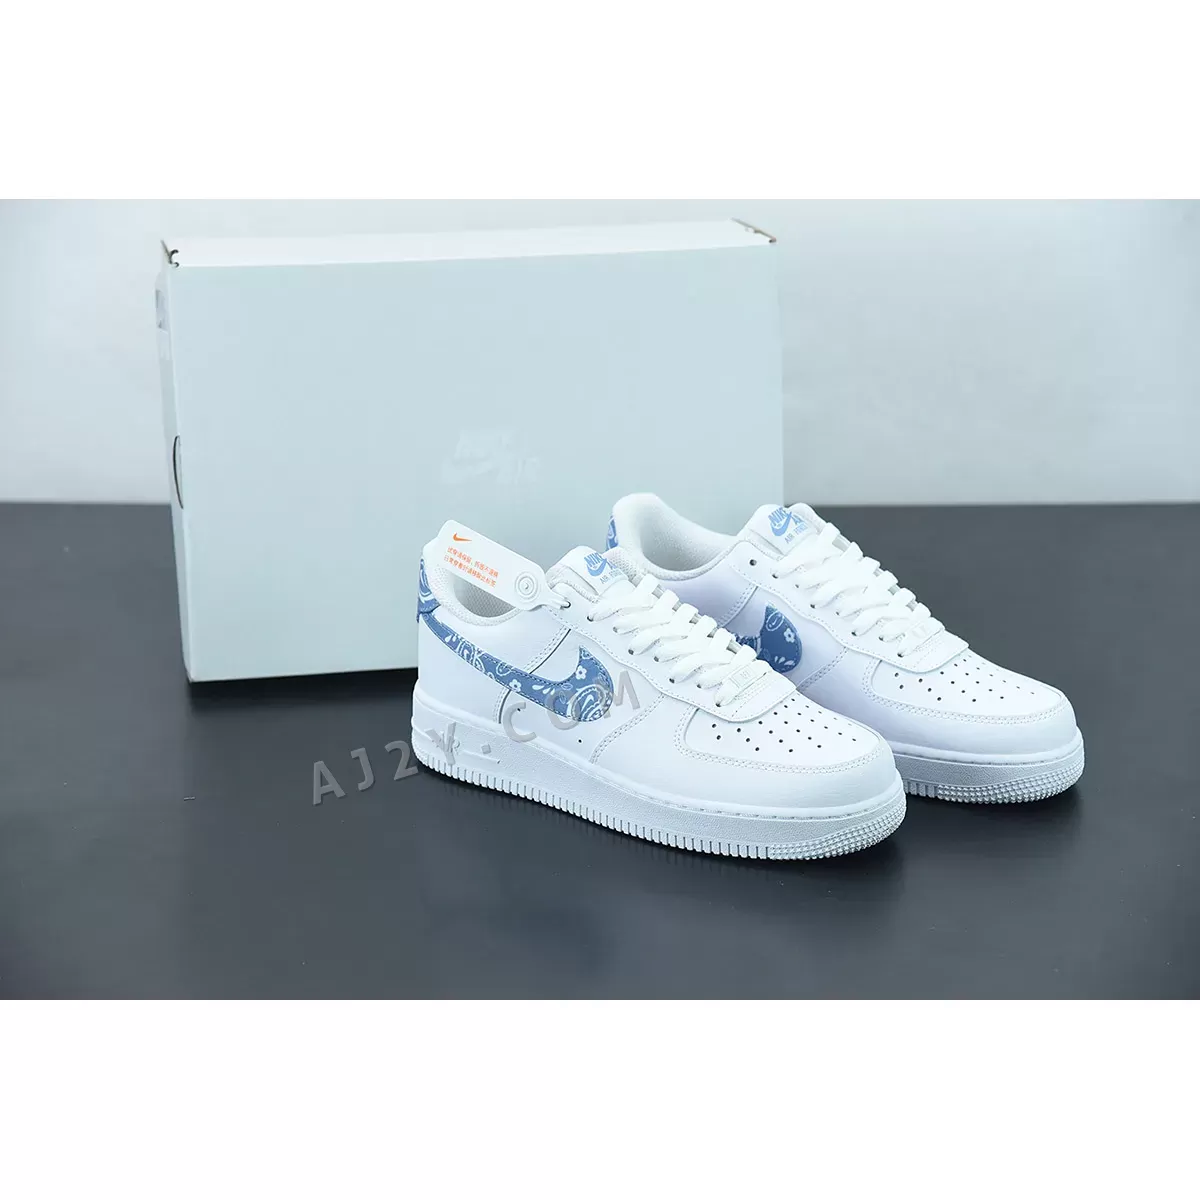 Nike Air Force 1 Low "Paisley" White/Worn Blue | AF1 BLUE